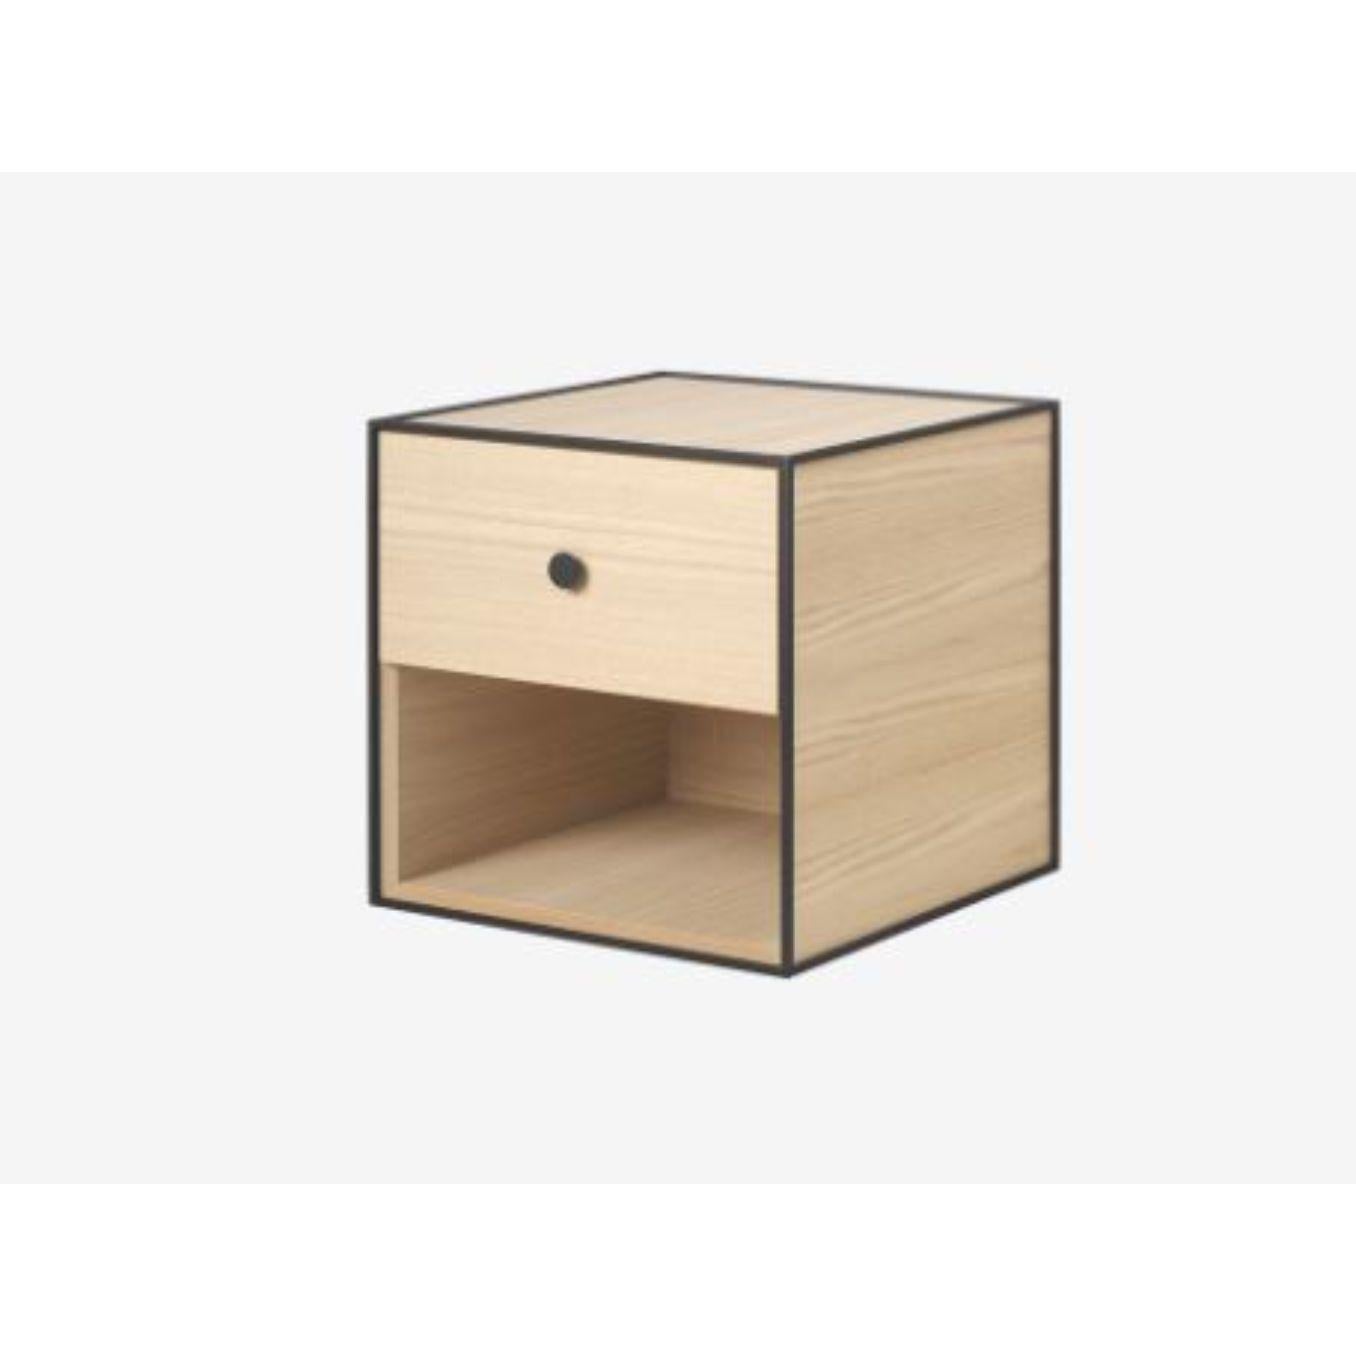 35 Oak frame box with 1 drawer by Lassen.
Dimensions: W 35 x D 35 x H 35 cm.
Materials: Finér, Melamin, Melamin, Melamine, Metal, Veneer, Oak
Also available in different colours and dimensions. 

By Lassen is a Danish design brand focused on